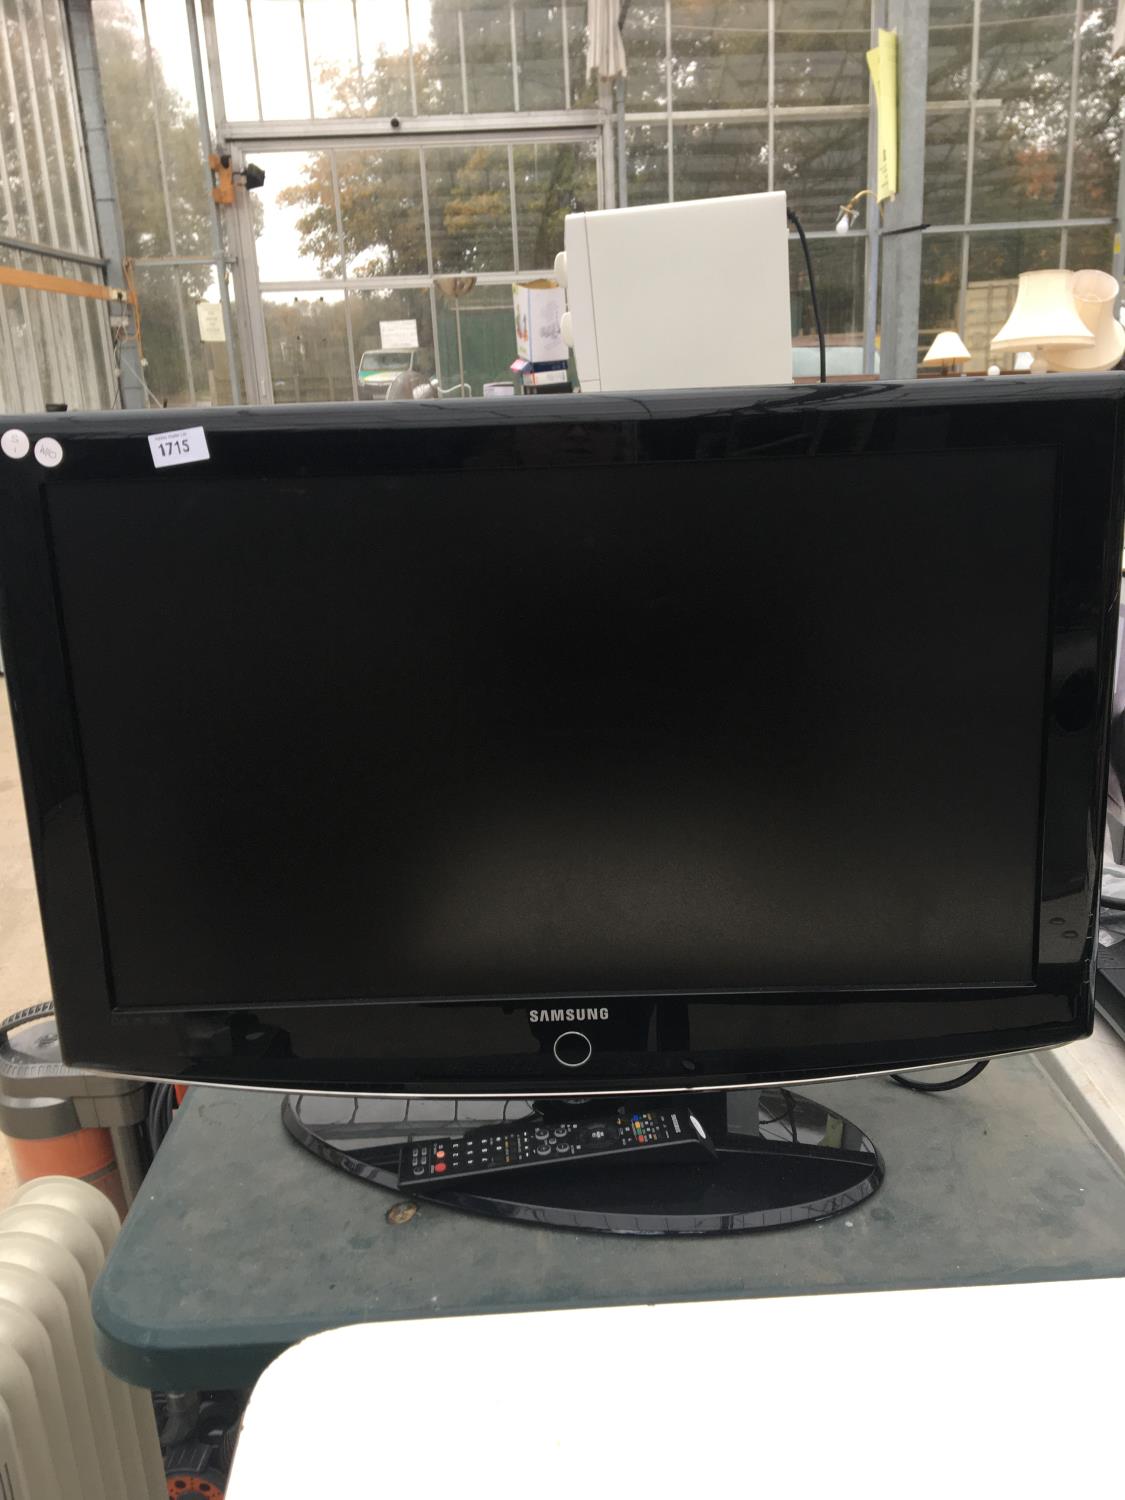 A SAMSUNG 32" TELEVISION WITH REMOTE CONTROL BELIEVD IN WORKING ORDER BUT NO WARRANTY - W/O